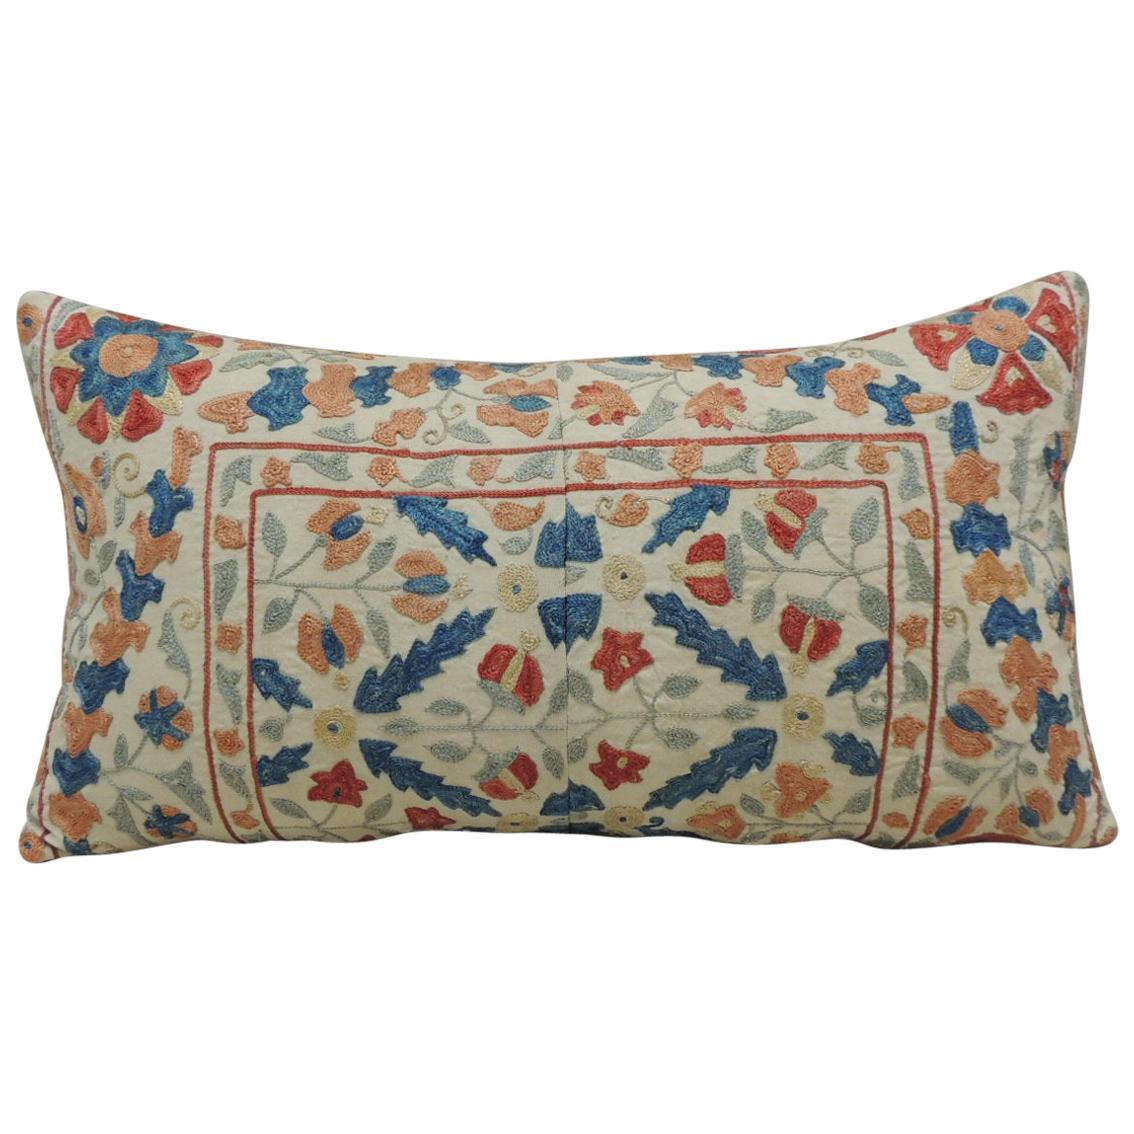 Vintage Orange and Blue Embroidered Suzani Decorative Bolster Pillow